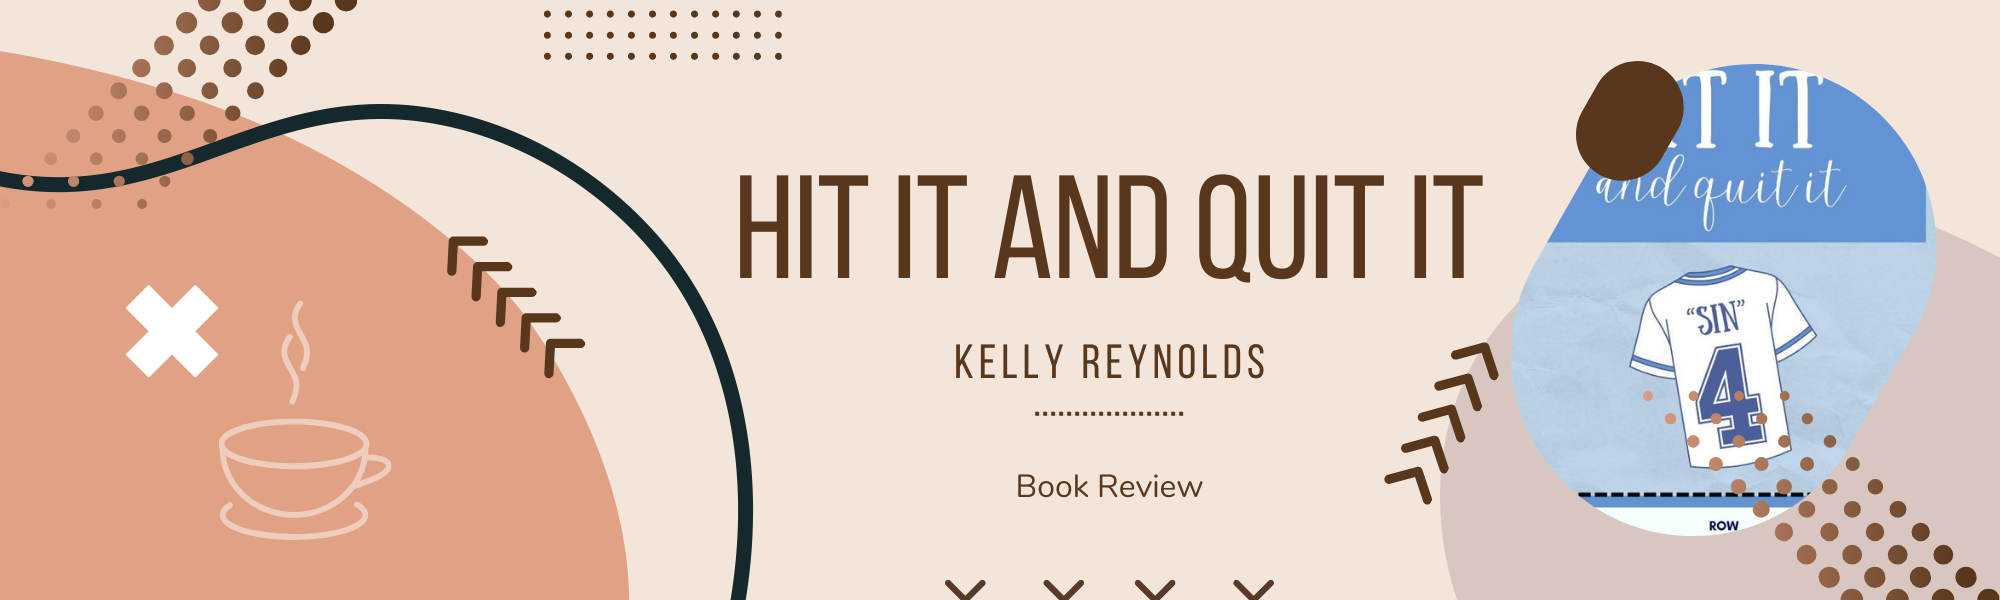 Book Review – ‘Hit It and Quit It’ by Kelly Reynolds